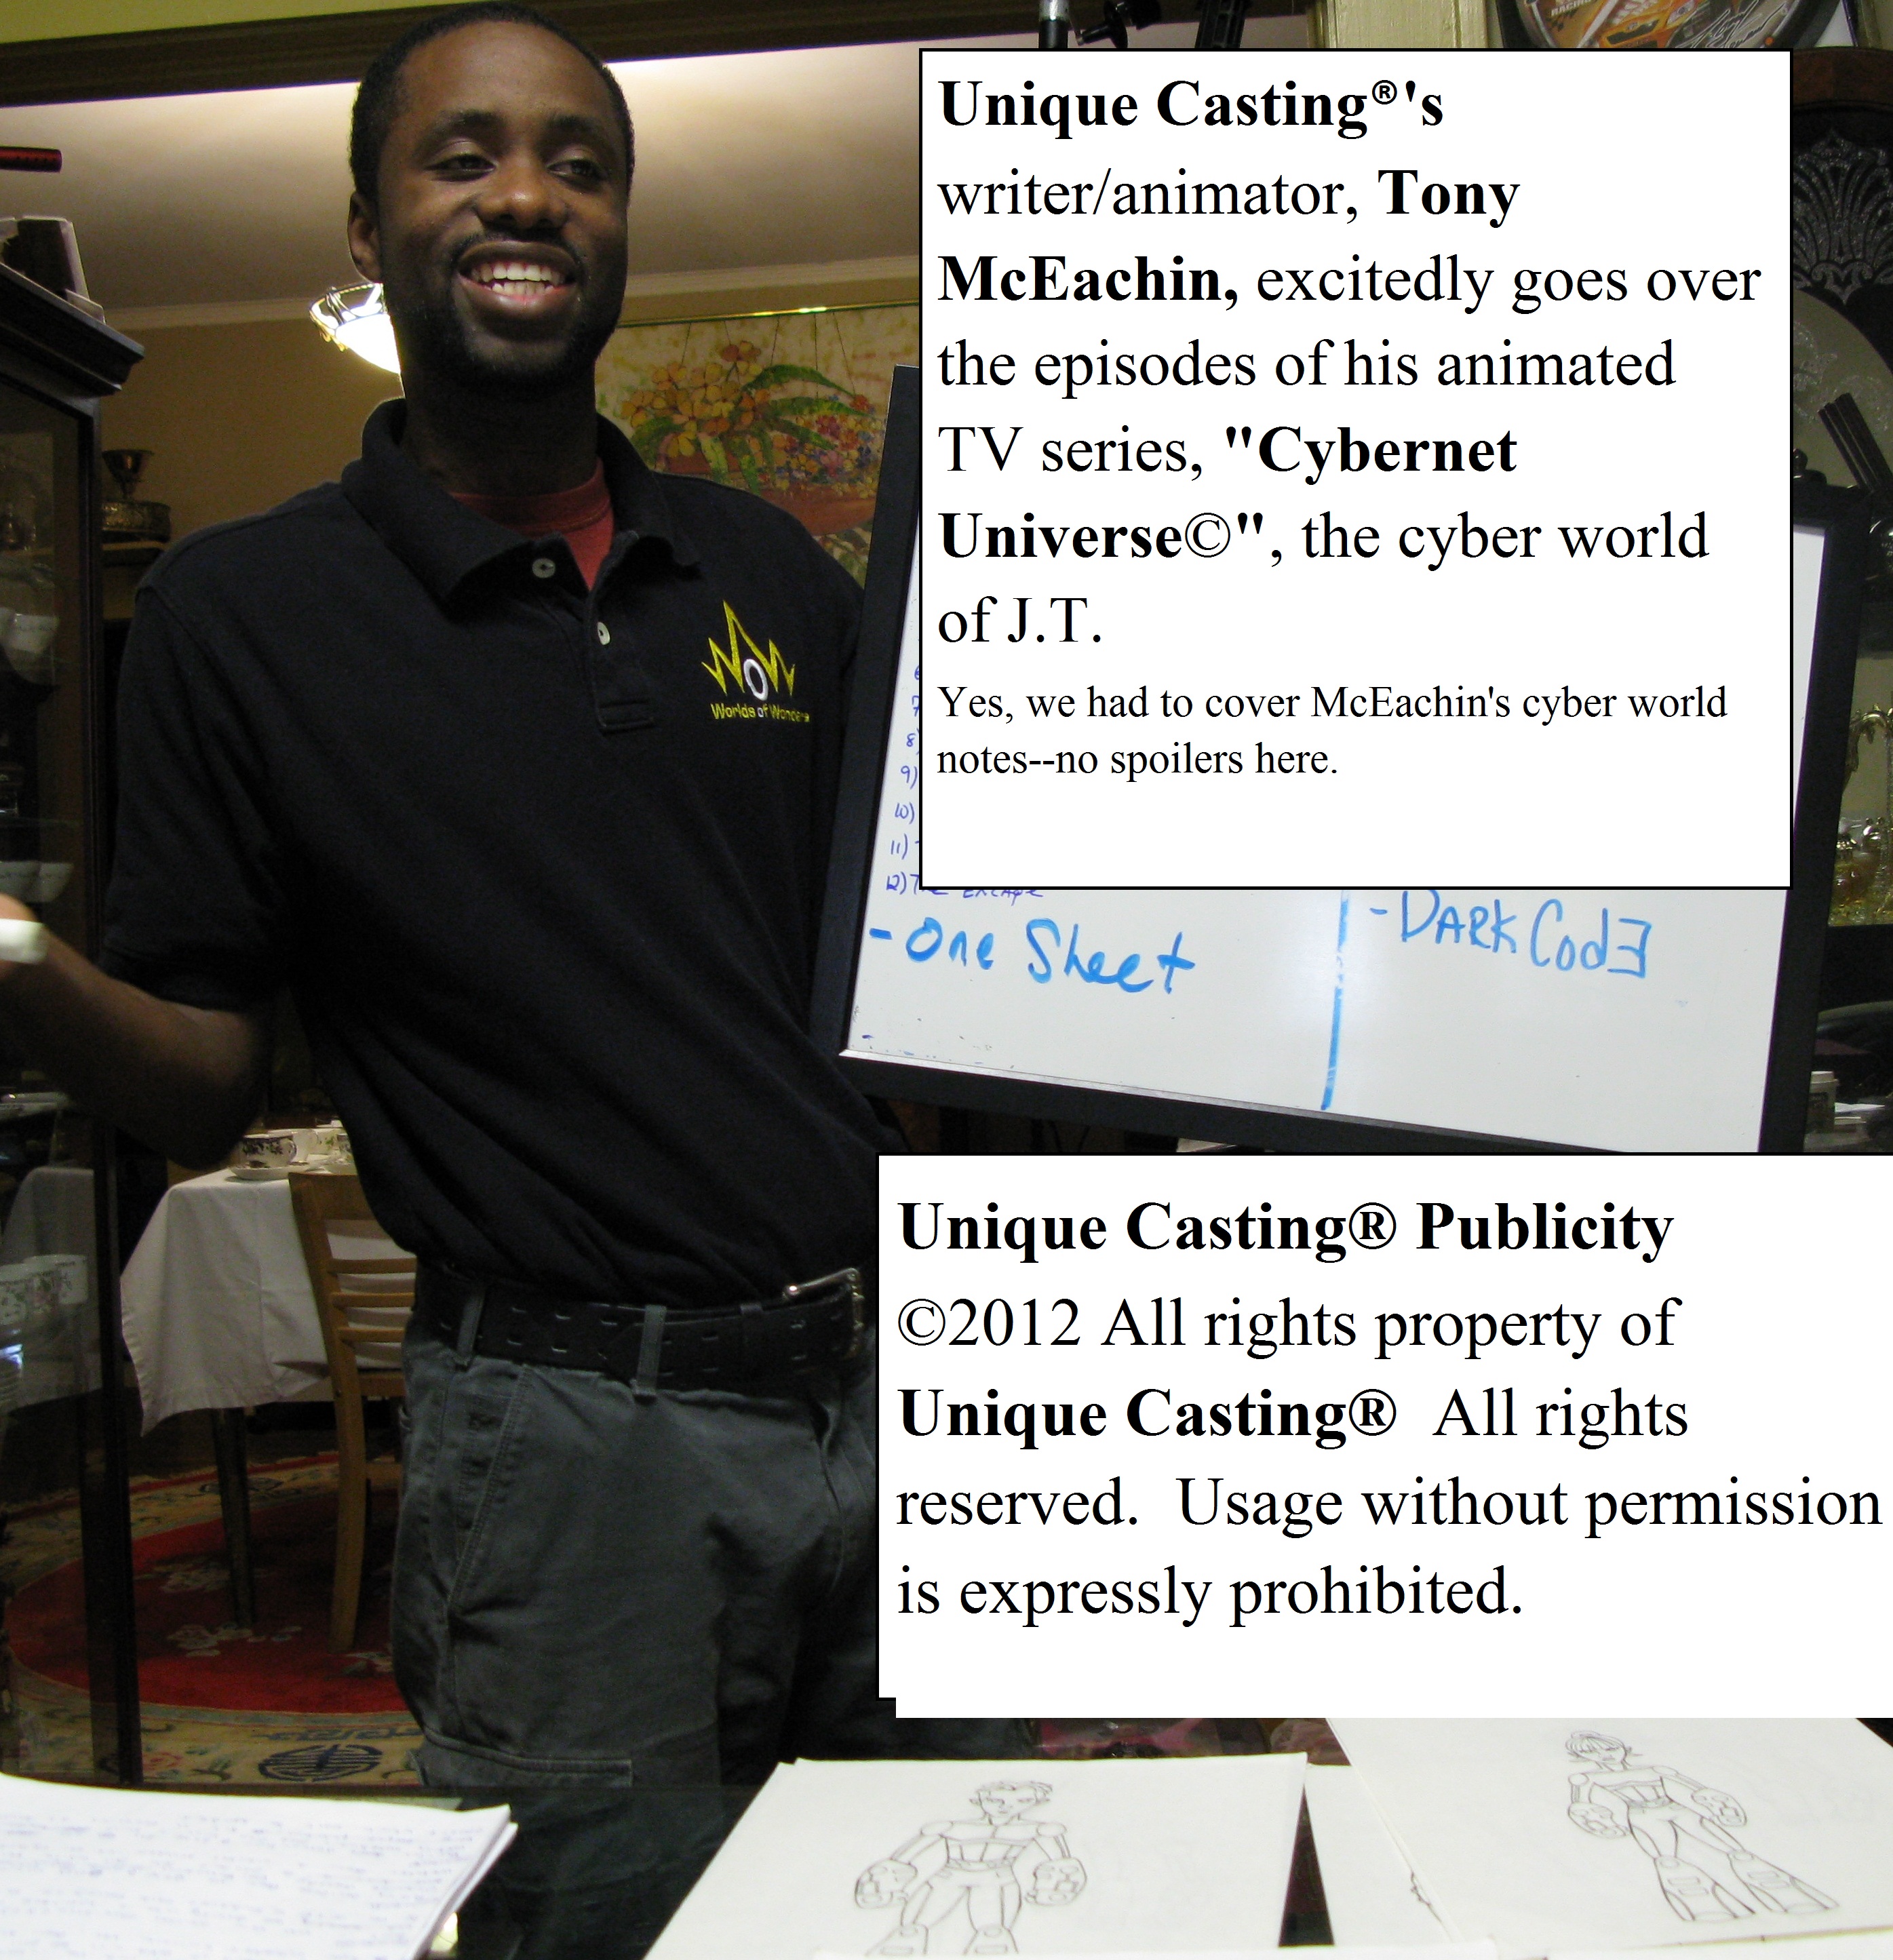 Unique Casting®'s Tony McEachin excitedly going over his animated TV Series 